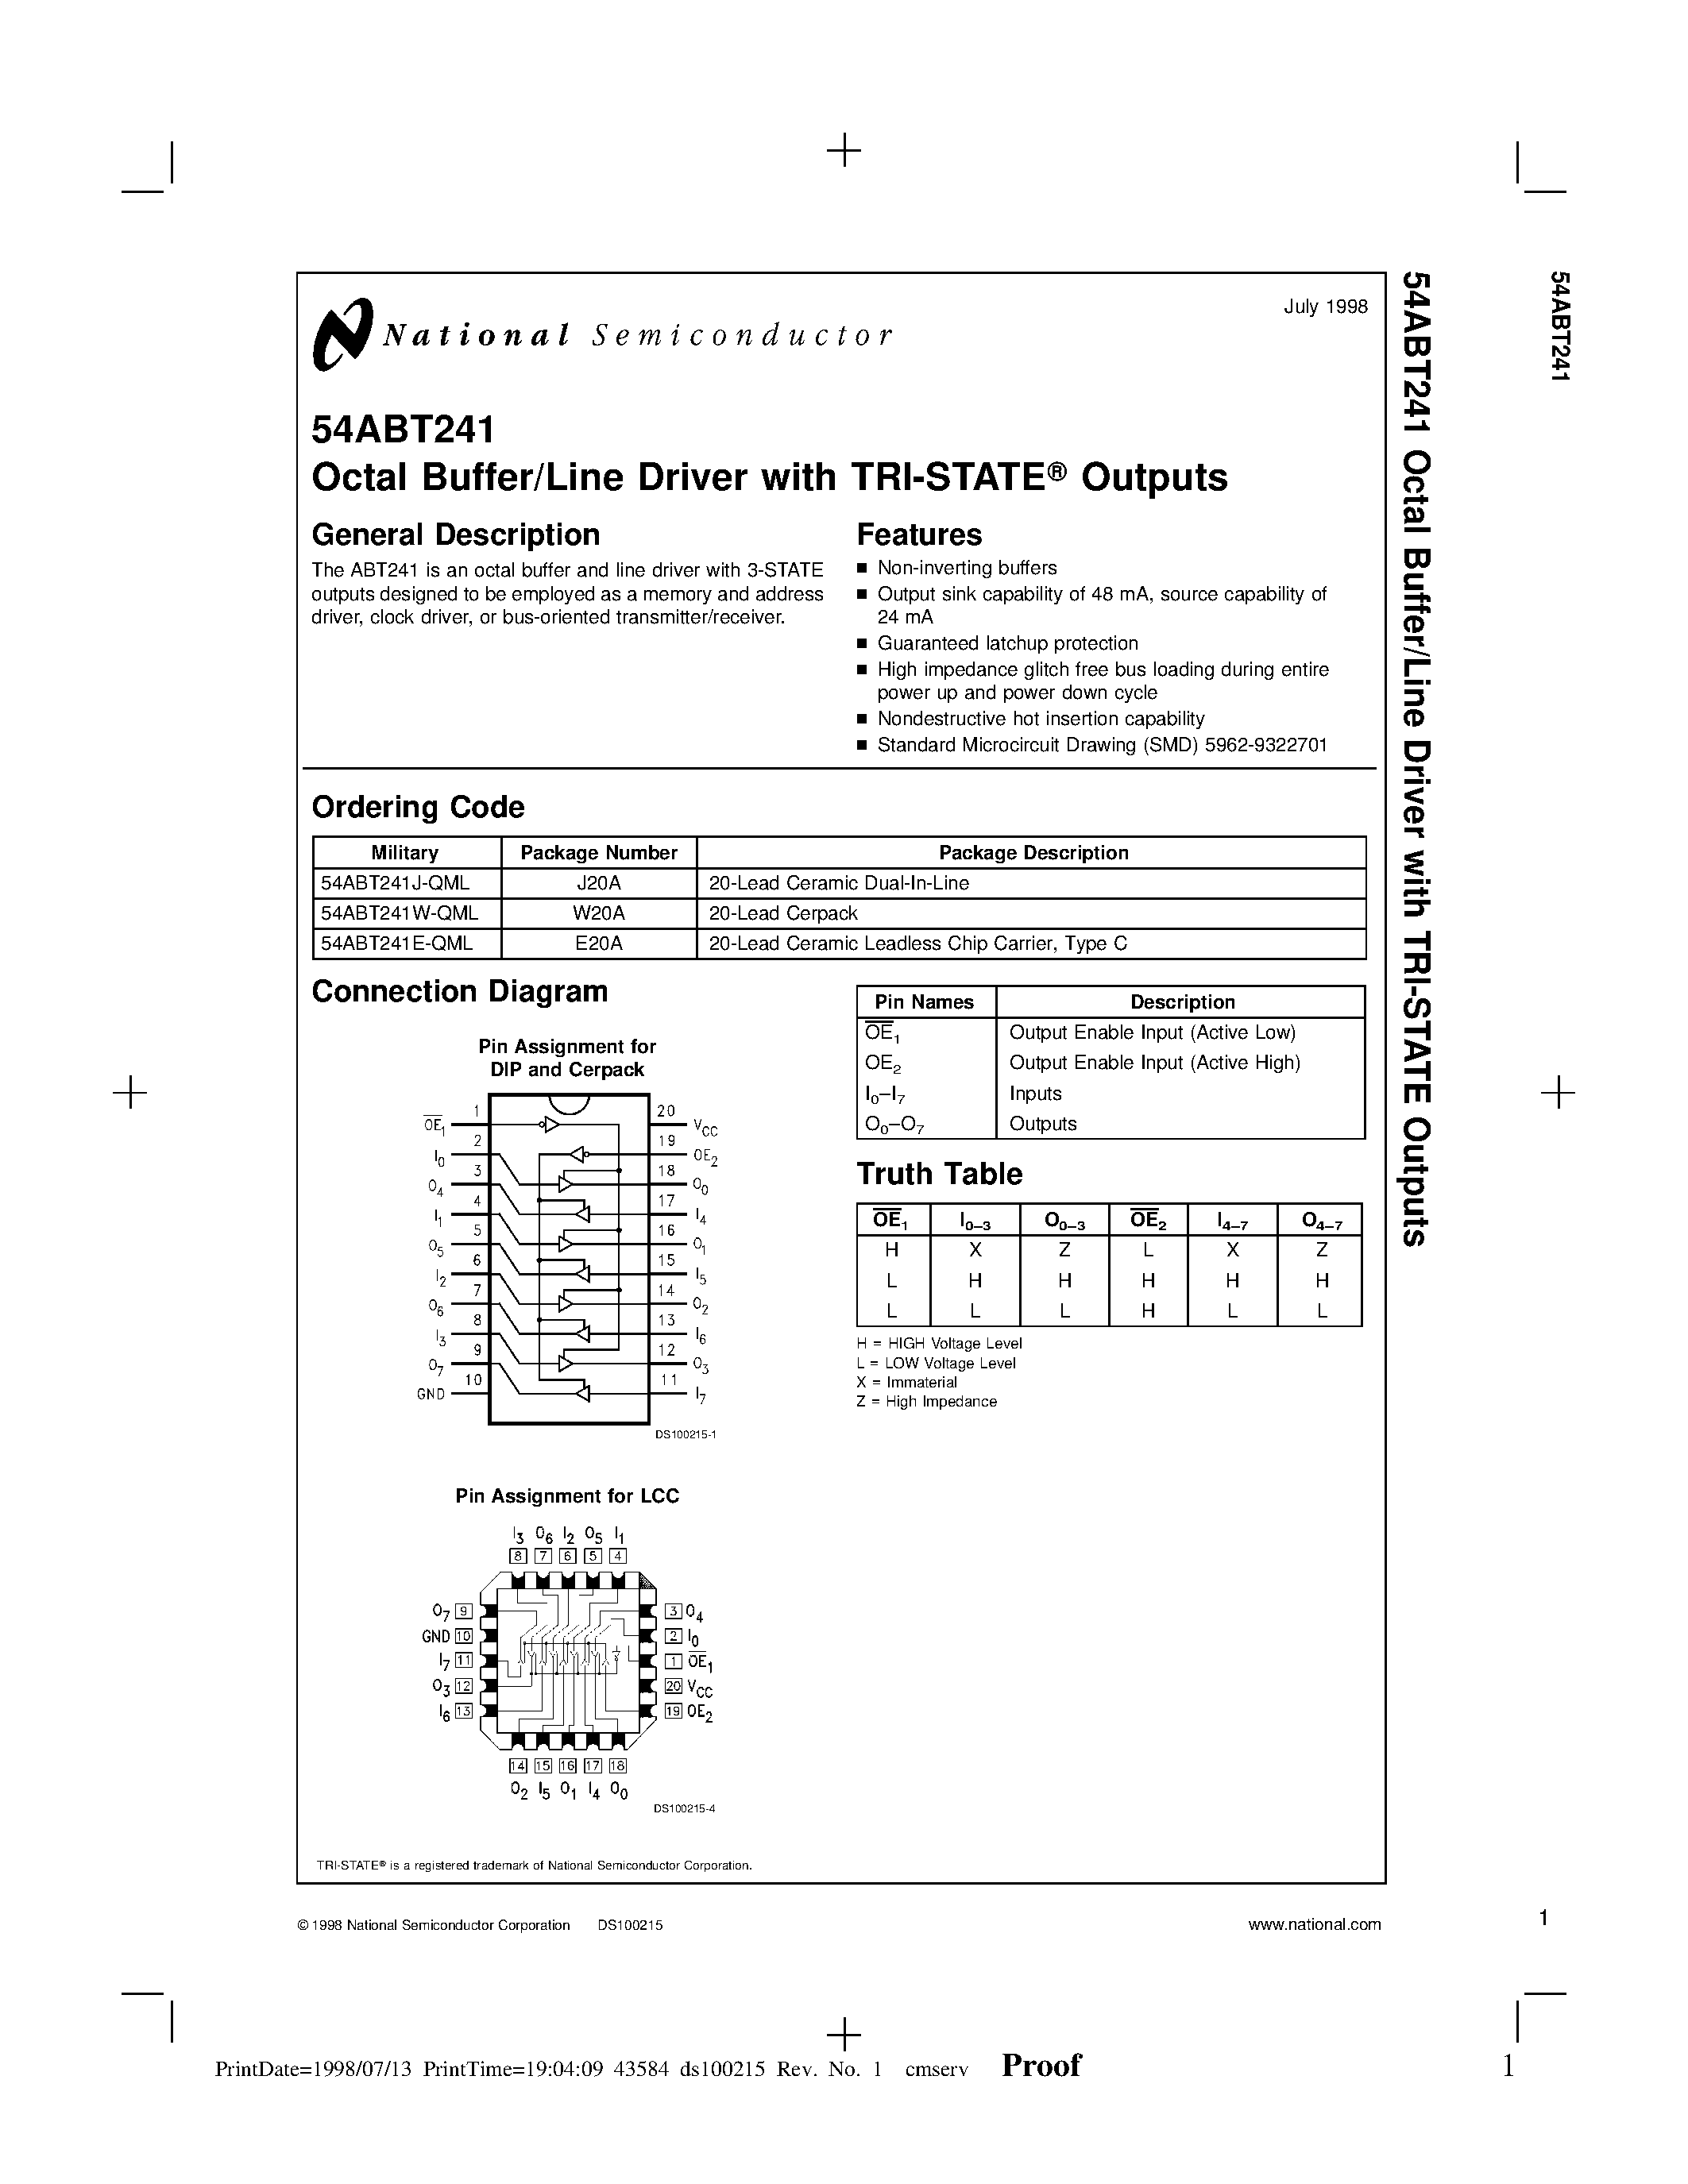 Datasheet 54ABT241W-QML - Octal Buffer/Line Driver with TRI-STATE Outputs page 1